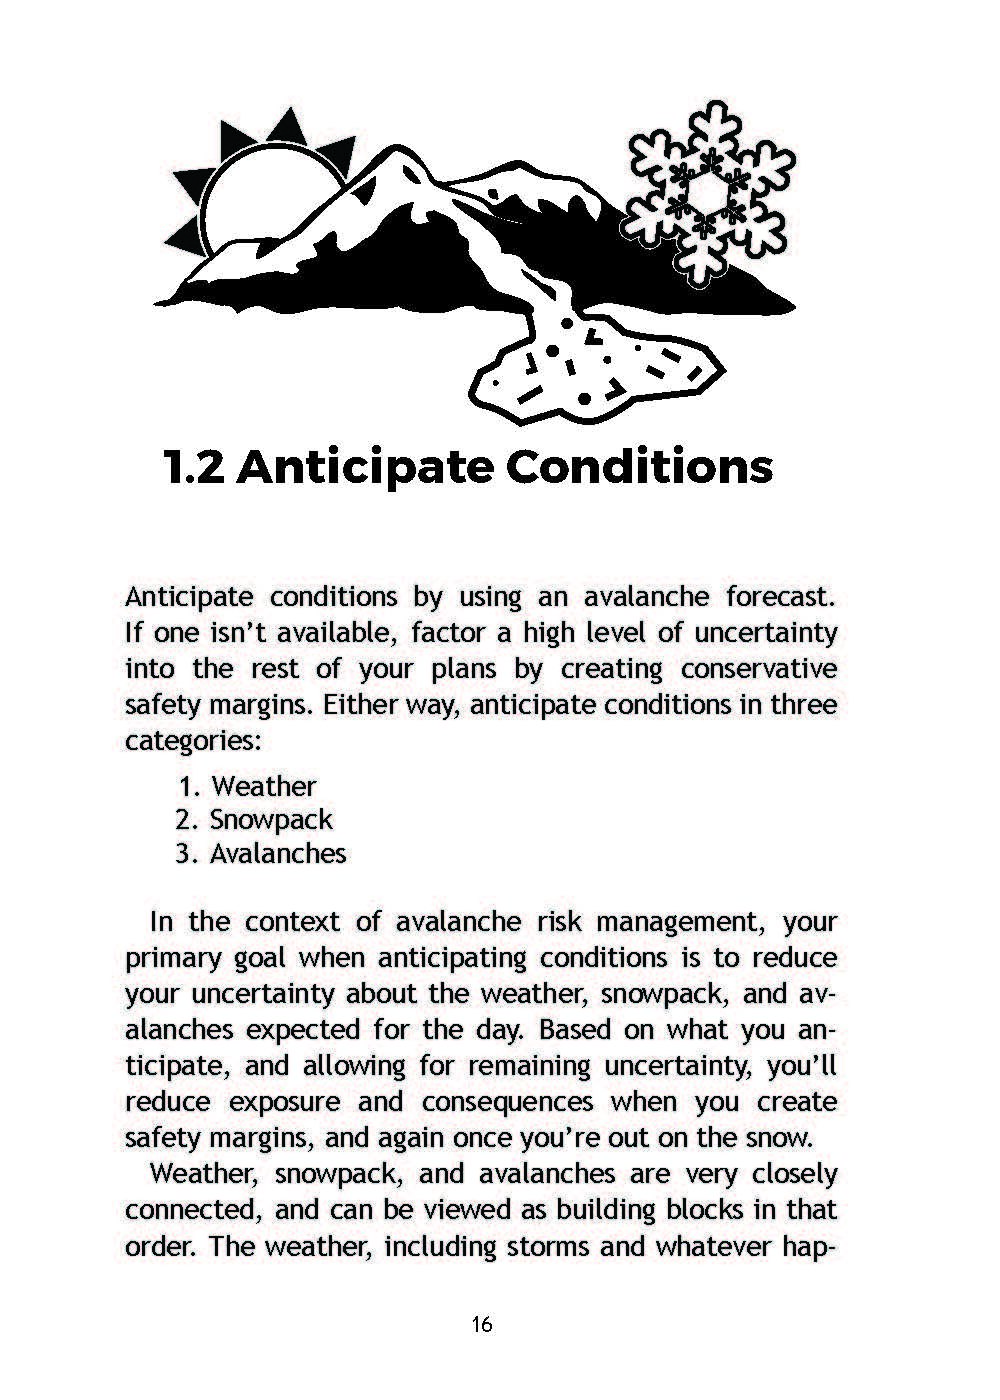 Portfolio example from Sierra Avalanche Center Manual_Page_1.jpg